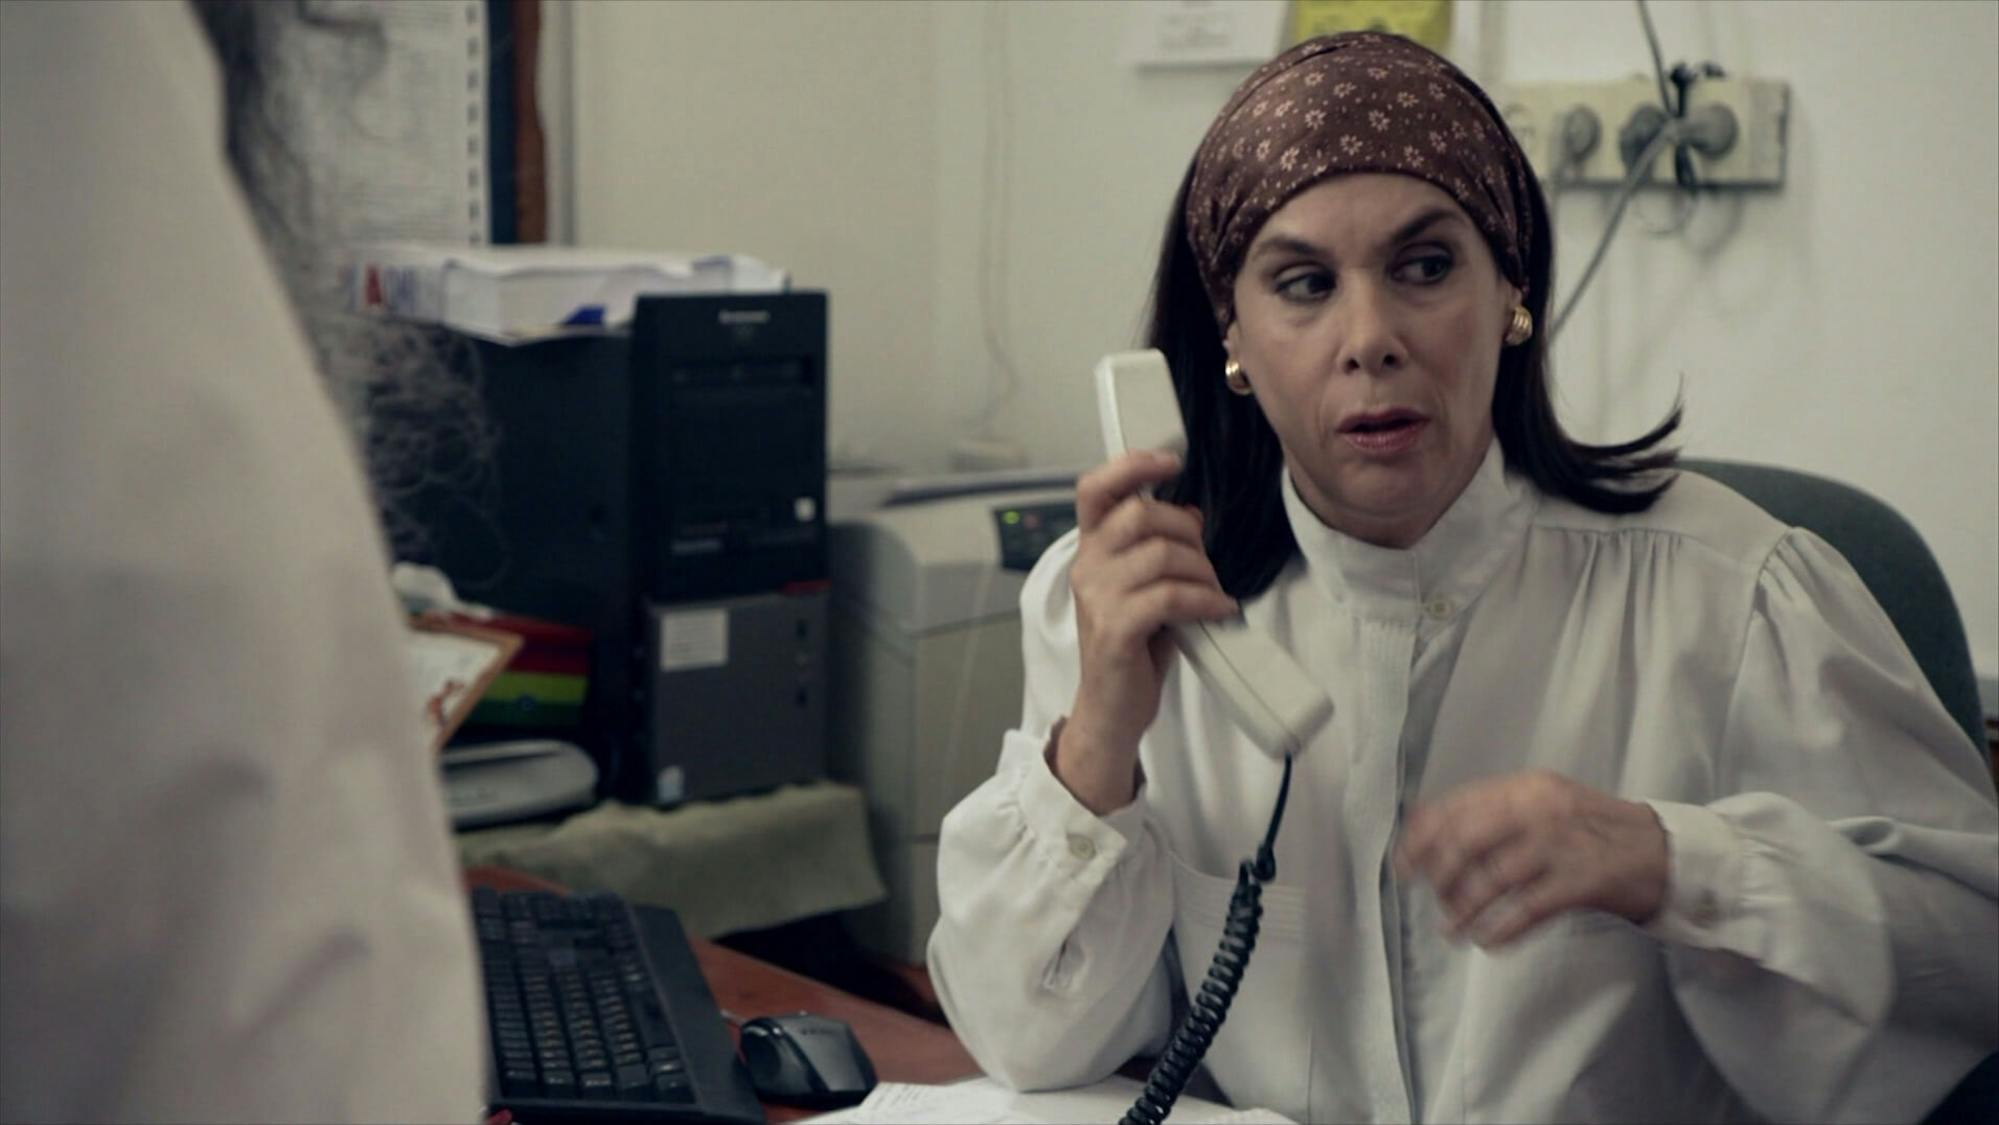 Aliza Gvili (Orly Silbersatz) wears a white blouse, gold earrings, and a silk headband. Her hair is curled at the ends, and she manages a desk with computers, files, printers, and keyboards. On the left side there is a figure’s arm, making the scene seem ominous.